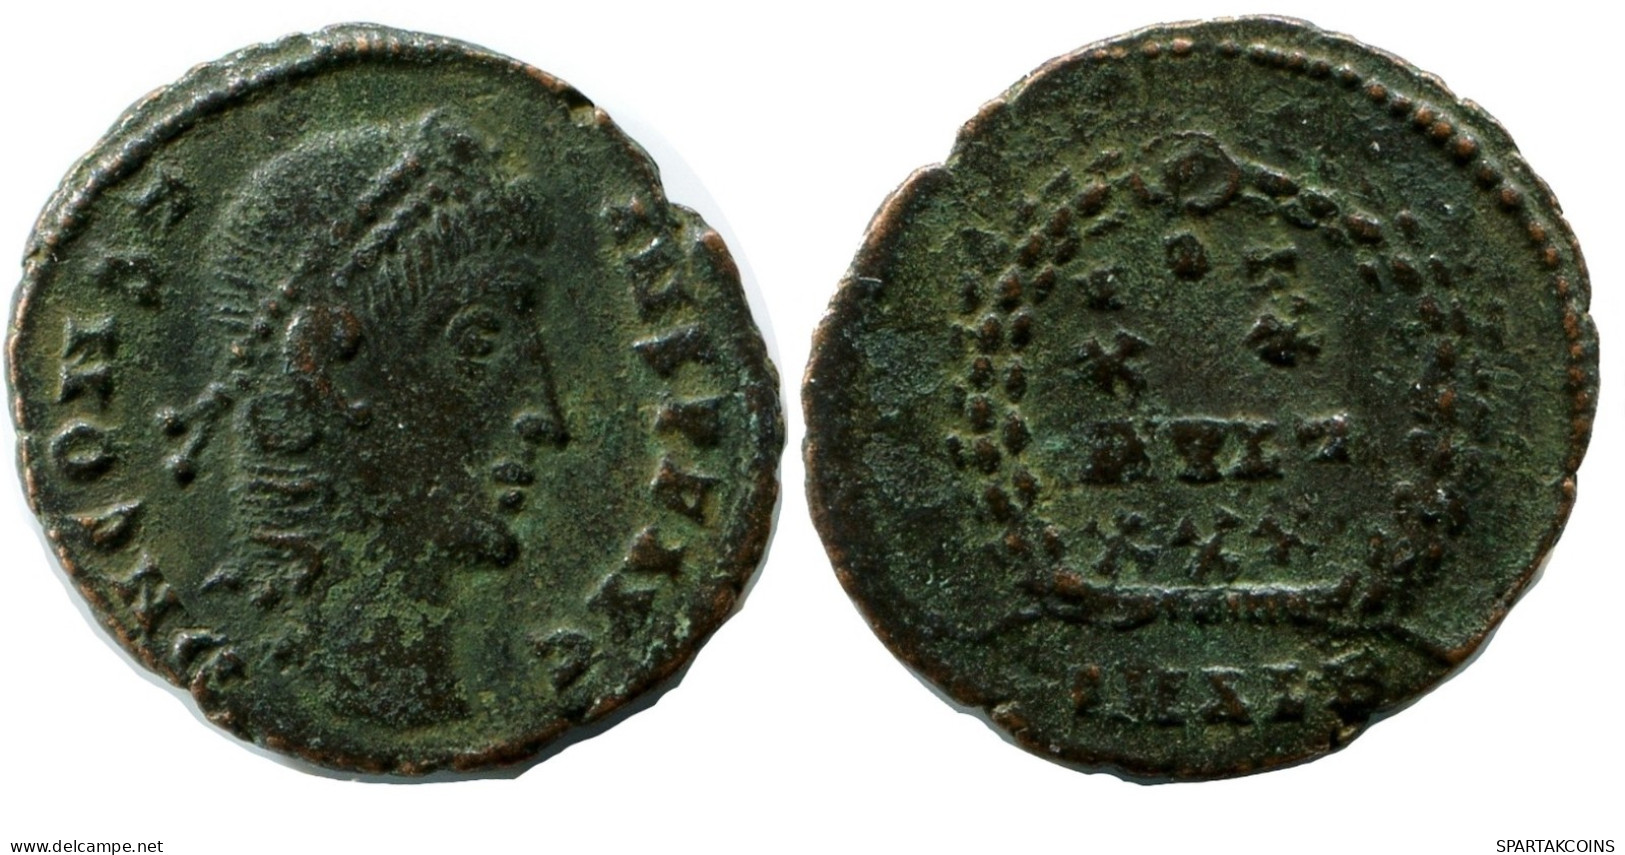 CONSTANS MINTED IN ALEKSANDRIA FROM THE ROYAL ONTARIO MUSEUM #ANC11365.14.E.A - L'Empire Chrétien (307 à 363)